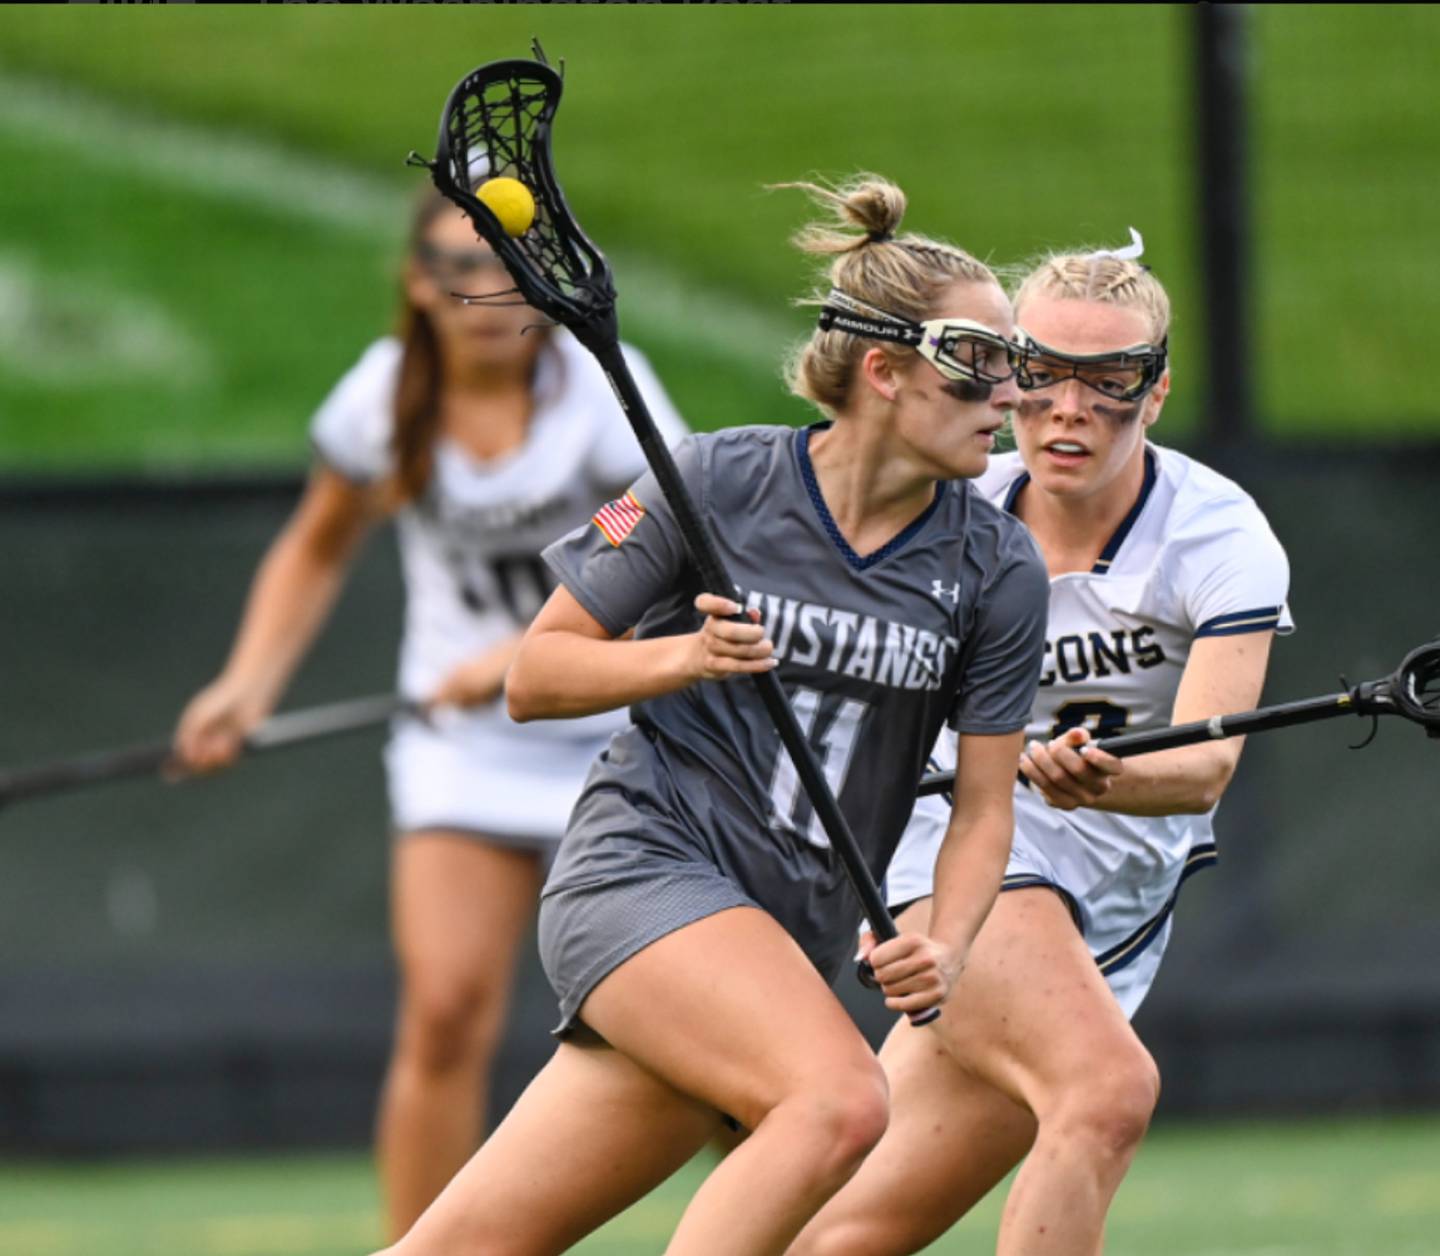 Maisy Clevenger racked up 64 goals for Class 3A state champ Marriotts Ridge last spring. The talented midfielder has signed with the University of Maryland.